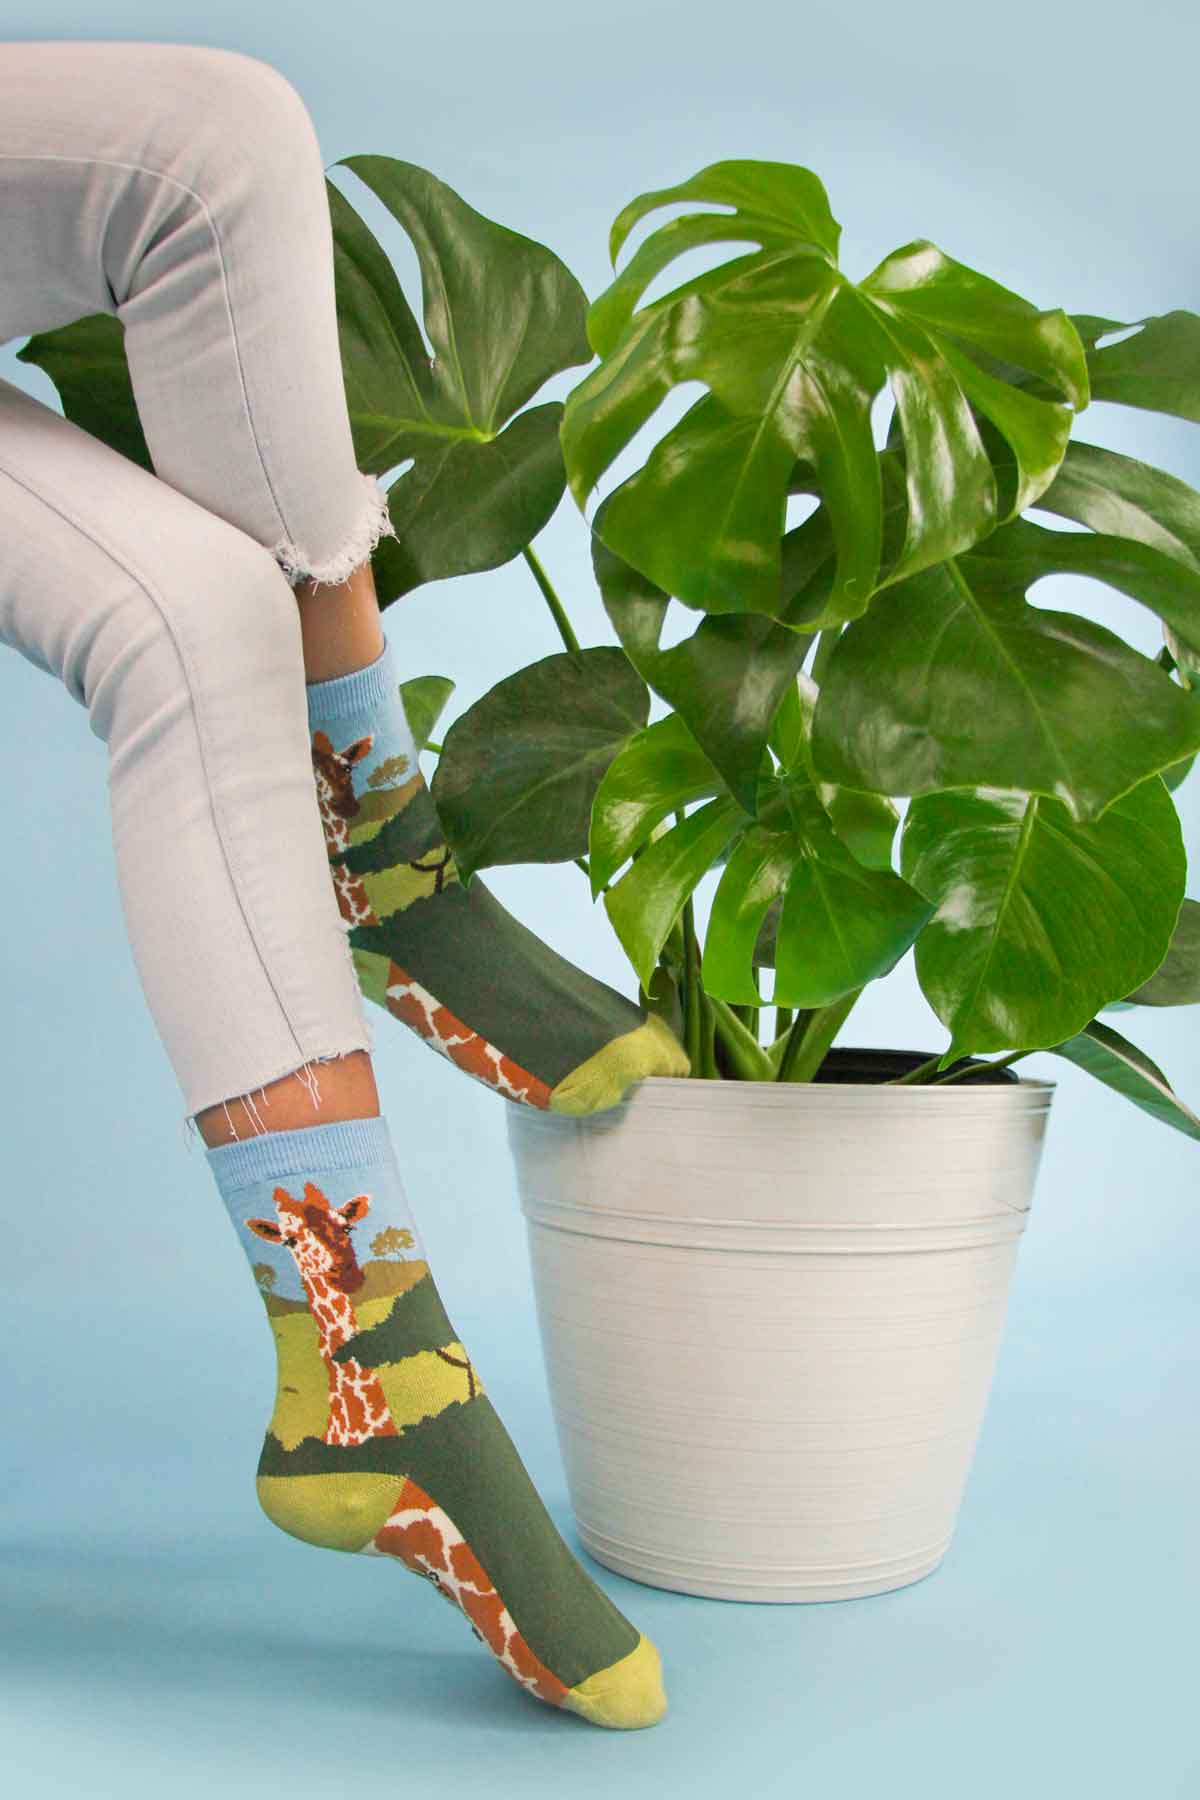 kid wearing white jeans and giraffe socks, with feet perched on a potted plant.